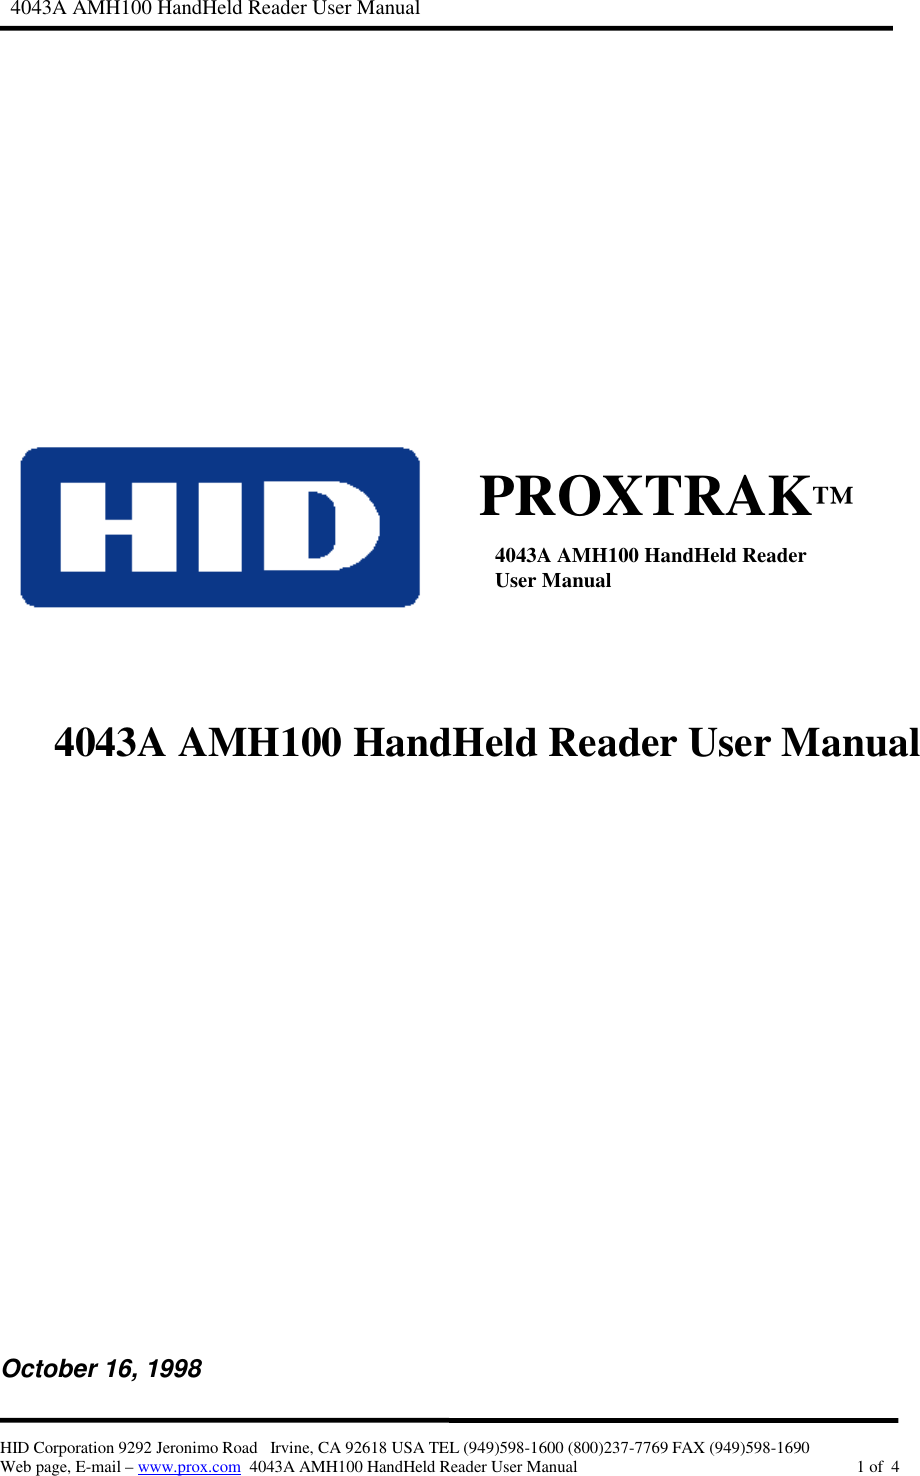   4043A AMH100 HandHeld Reader User ManualHID Corporation 9292 Jeronimo Road   Irvine, CA 92618 USA TEL (949)598-1600 (800)237-7769 FAX (949)598-1690Web page, E-mail – www.prox.com  4043A AMH100 HandHeld Reader User Manual 1 of  44043A AMH100 HandHeld Reader User ManualOctober 16, 1998PROXTRAK™4043A AMH100 HandHeld ReaderUser Manual